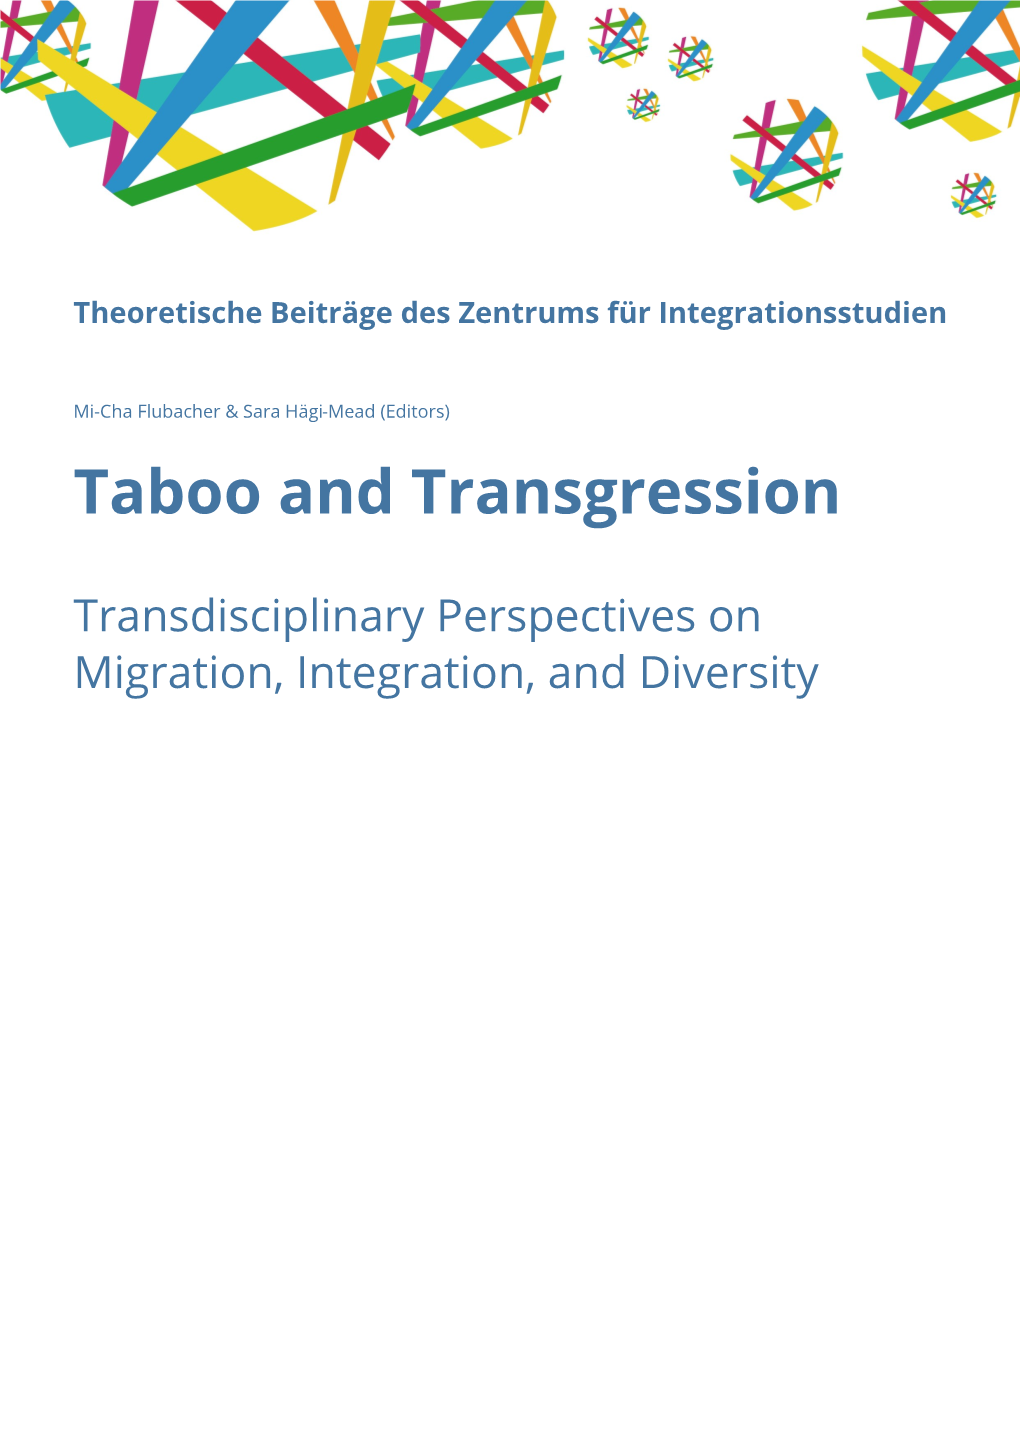 Taboo and Transgression